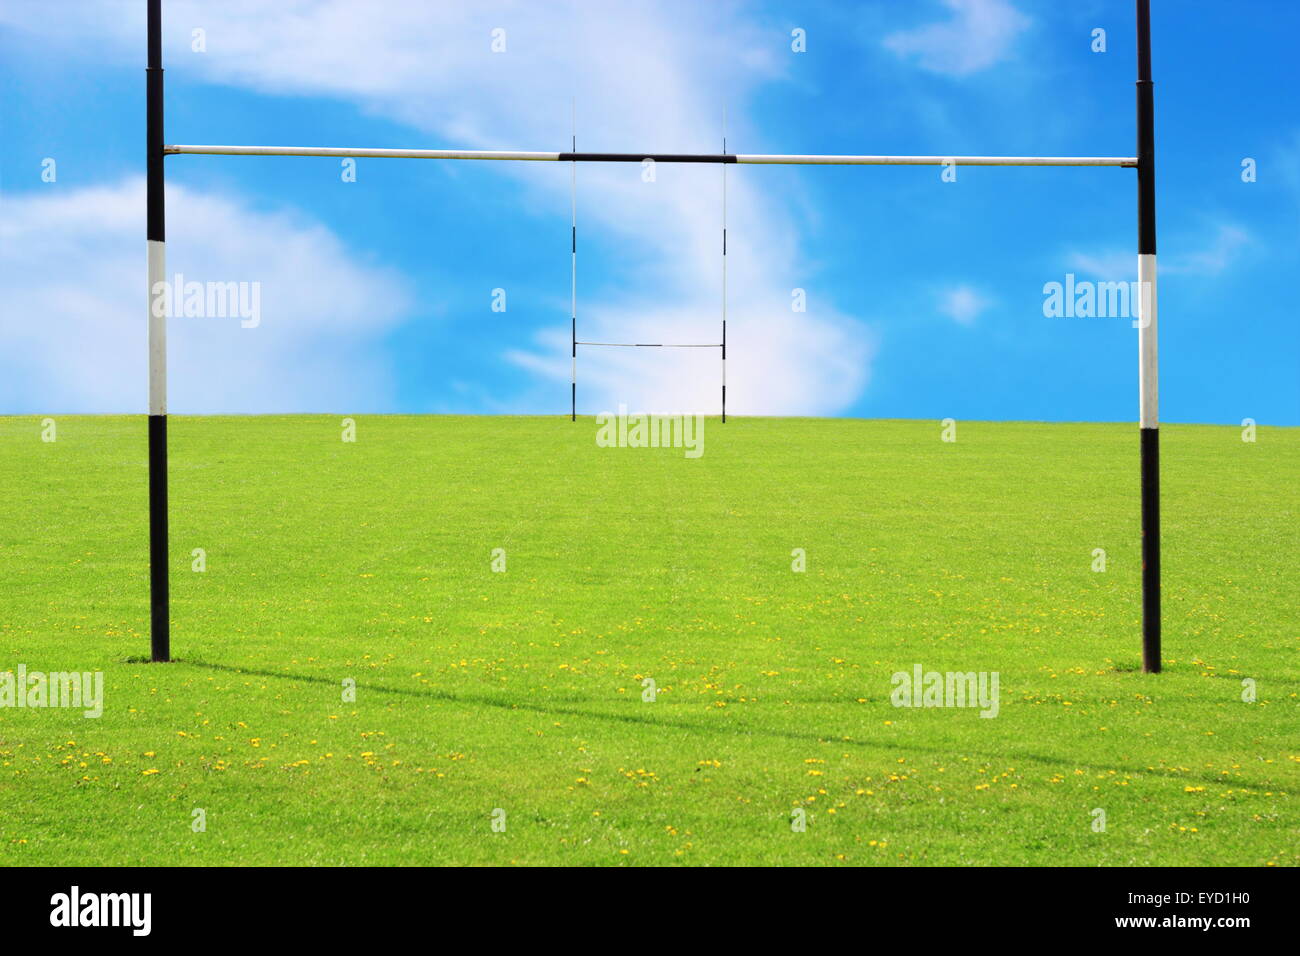 abstract view of empty rugby field and goalposts Stock Photo